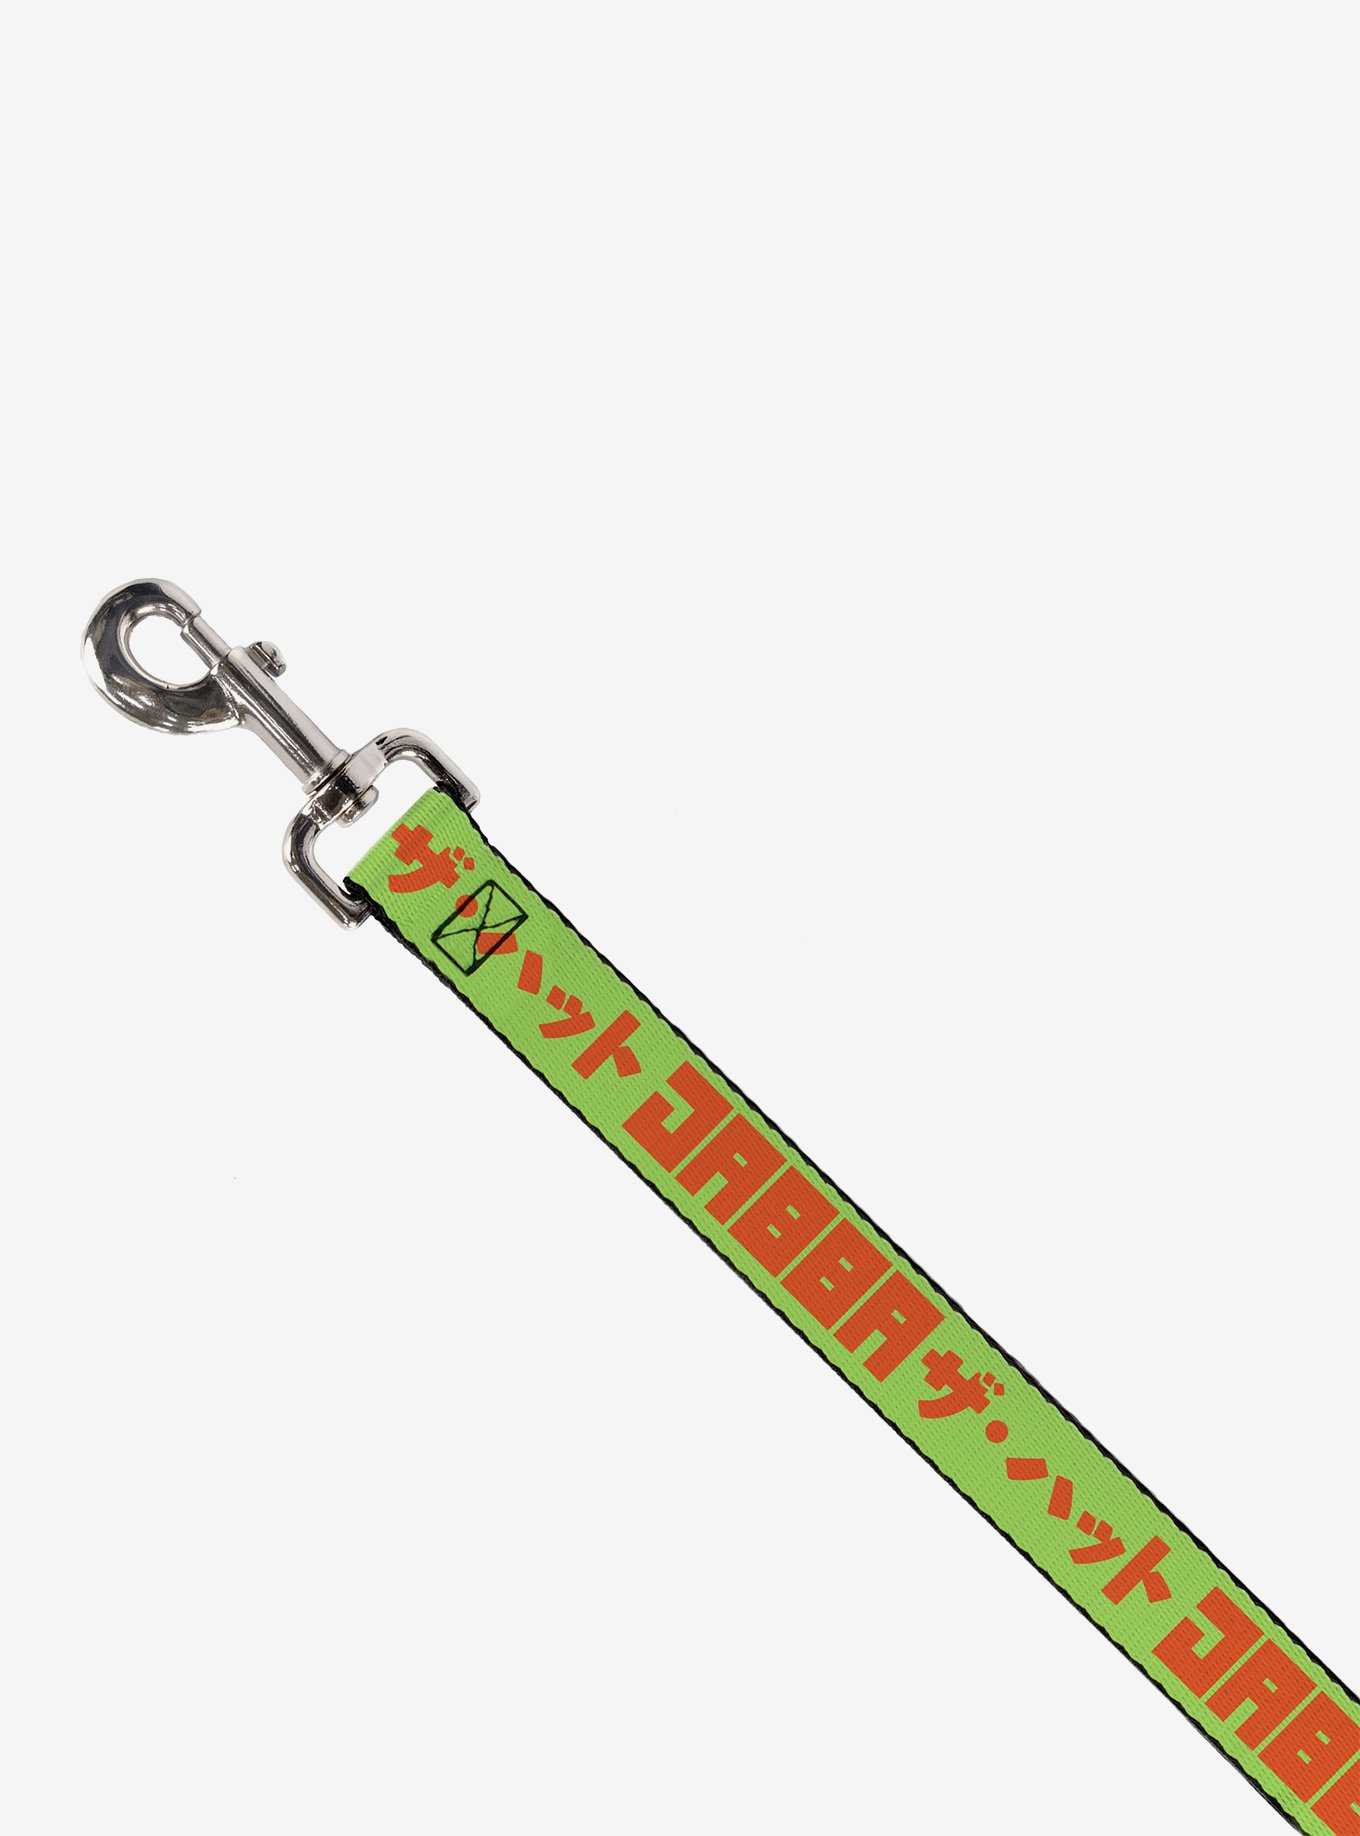 Star Wars Jabba The Hutt Text and Characters Dog Leash, , hi-res